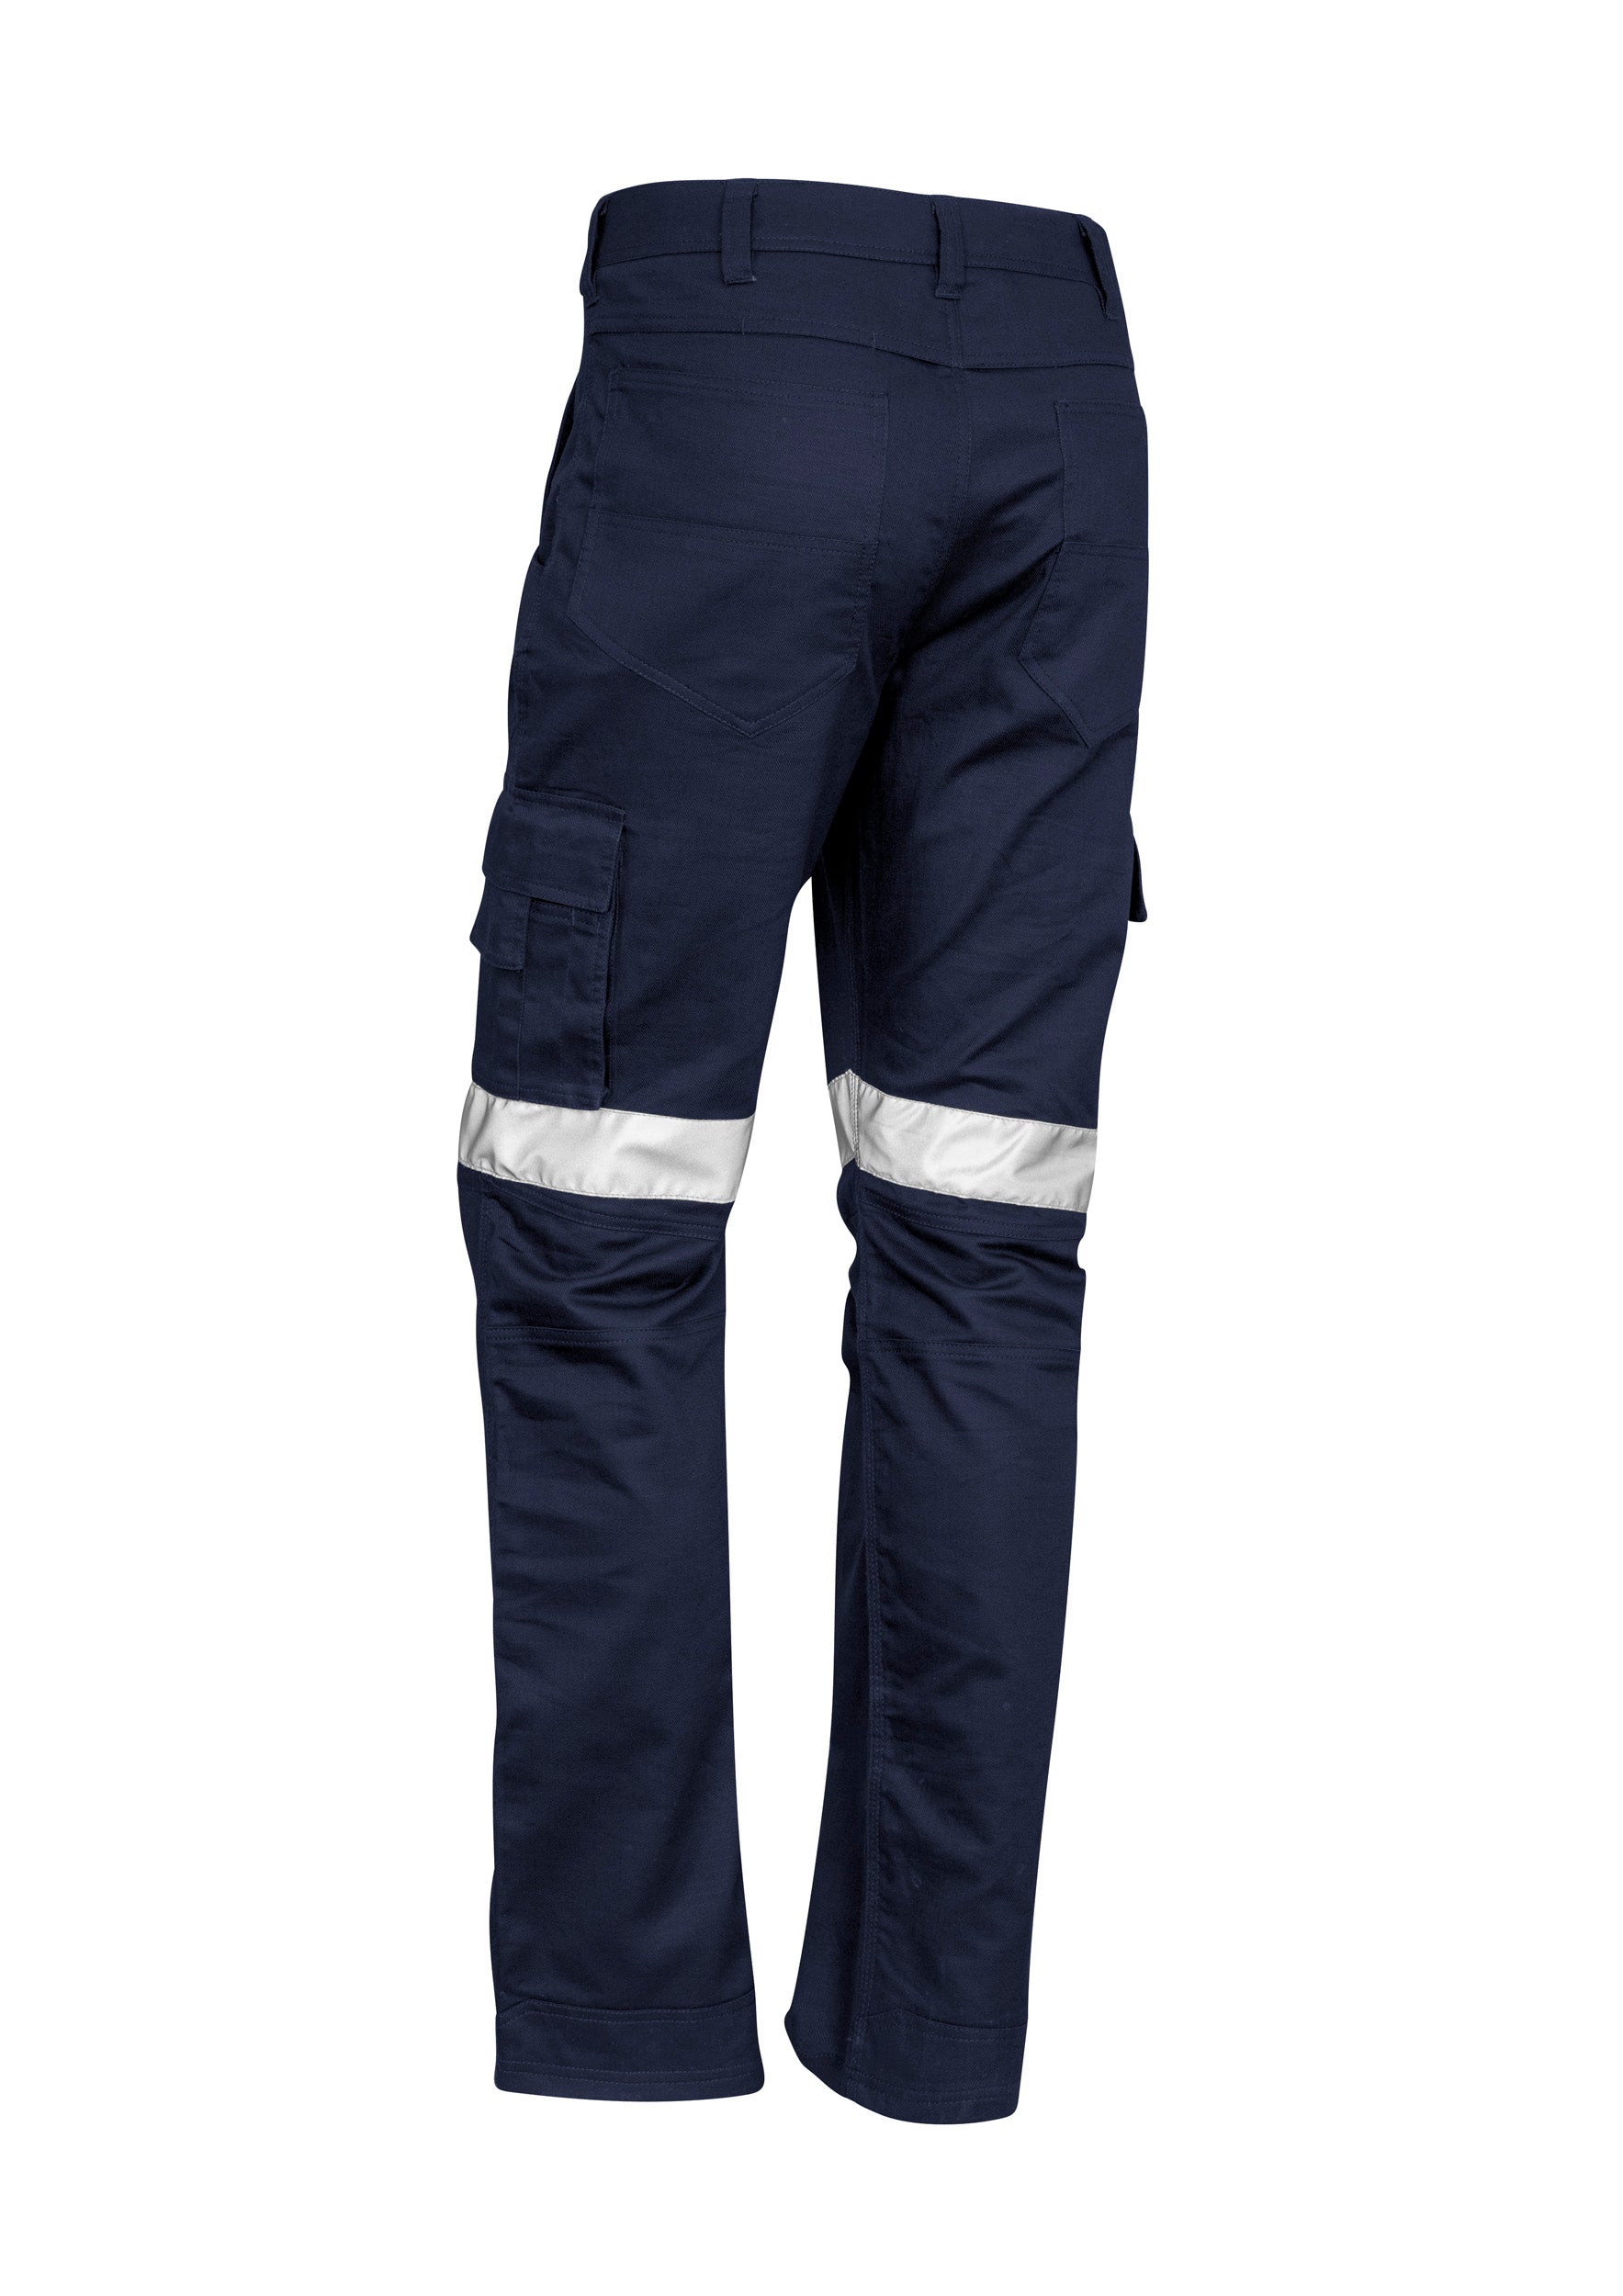 Syzmik ZP904S Men's Rugged Cooling Taped Pant (Stout) NAVY